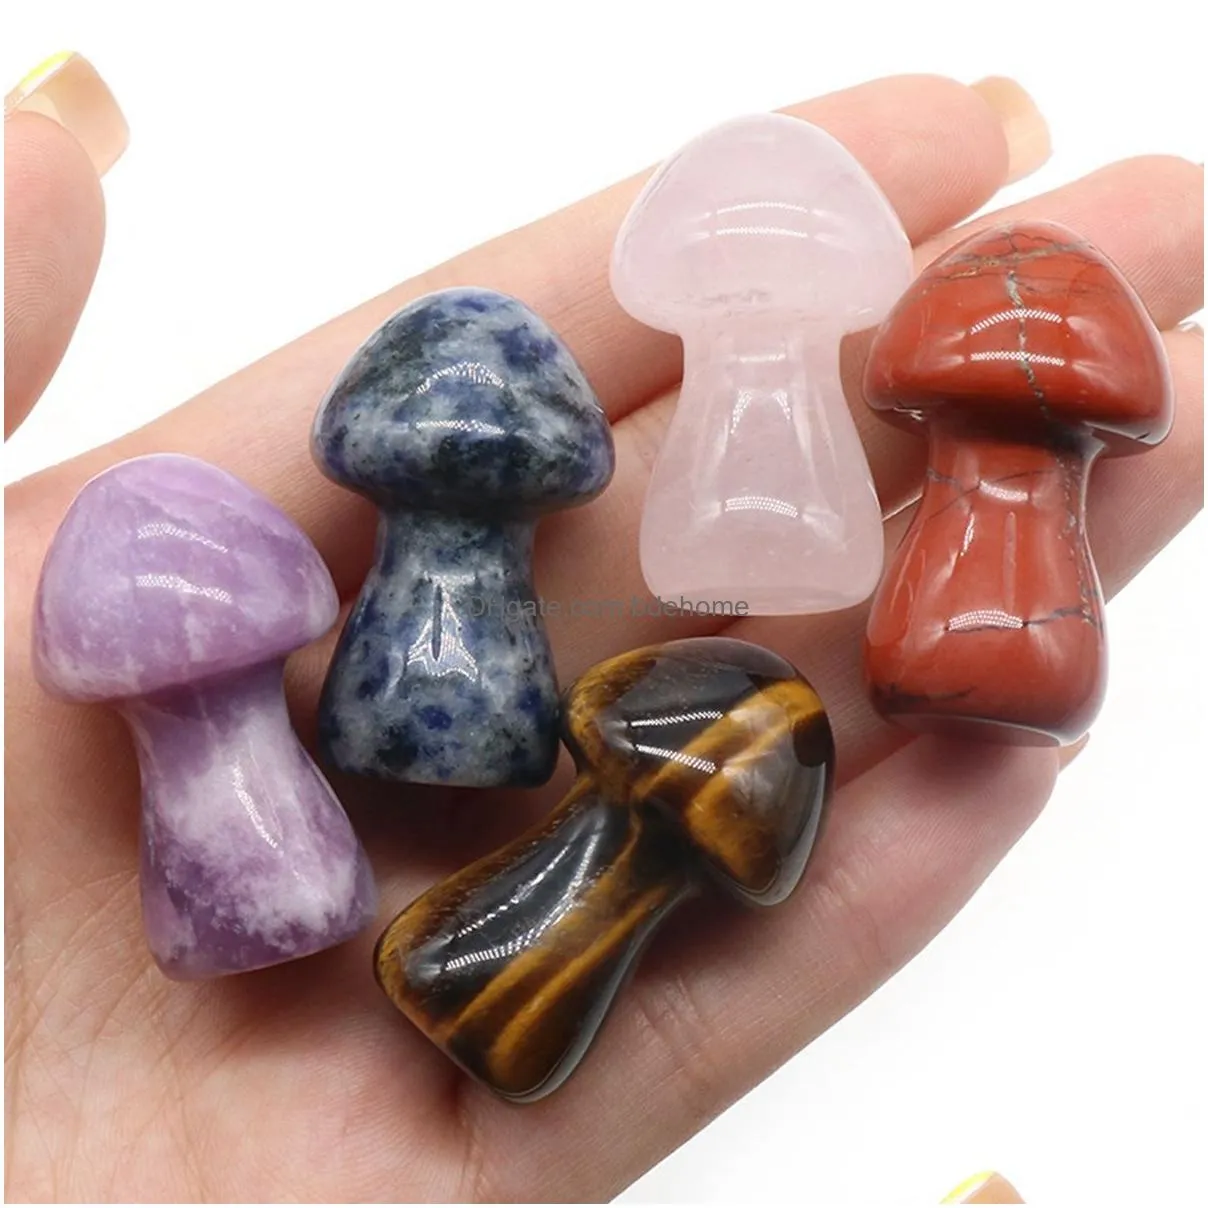 35mm natural hand carving mushroom howlite gemstones and crystals chakra stones for mushrooms home decorations